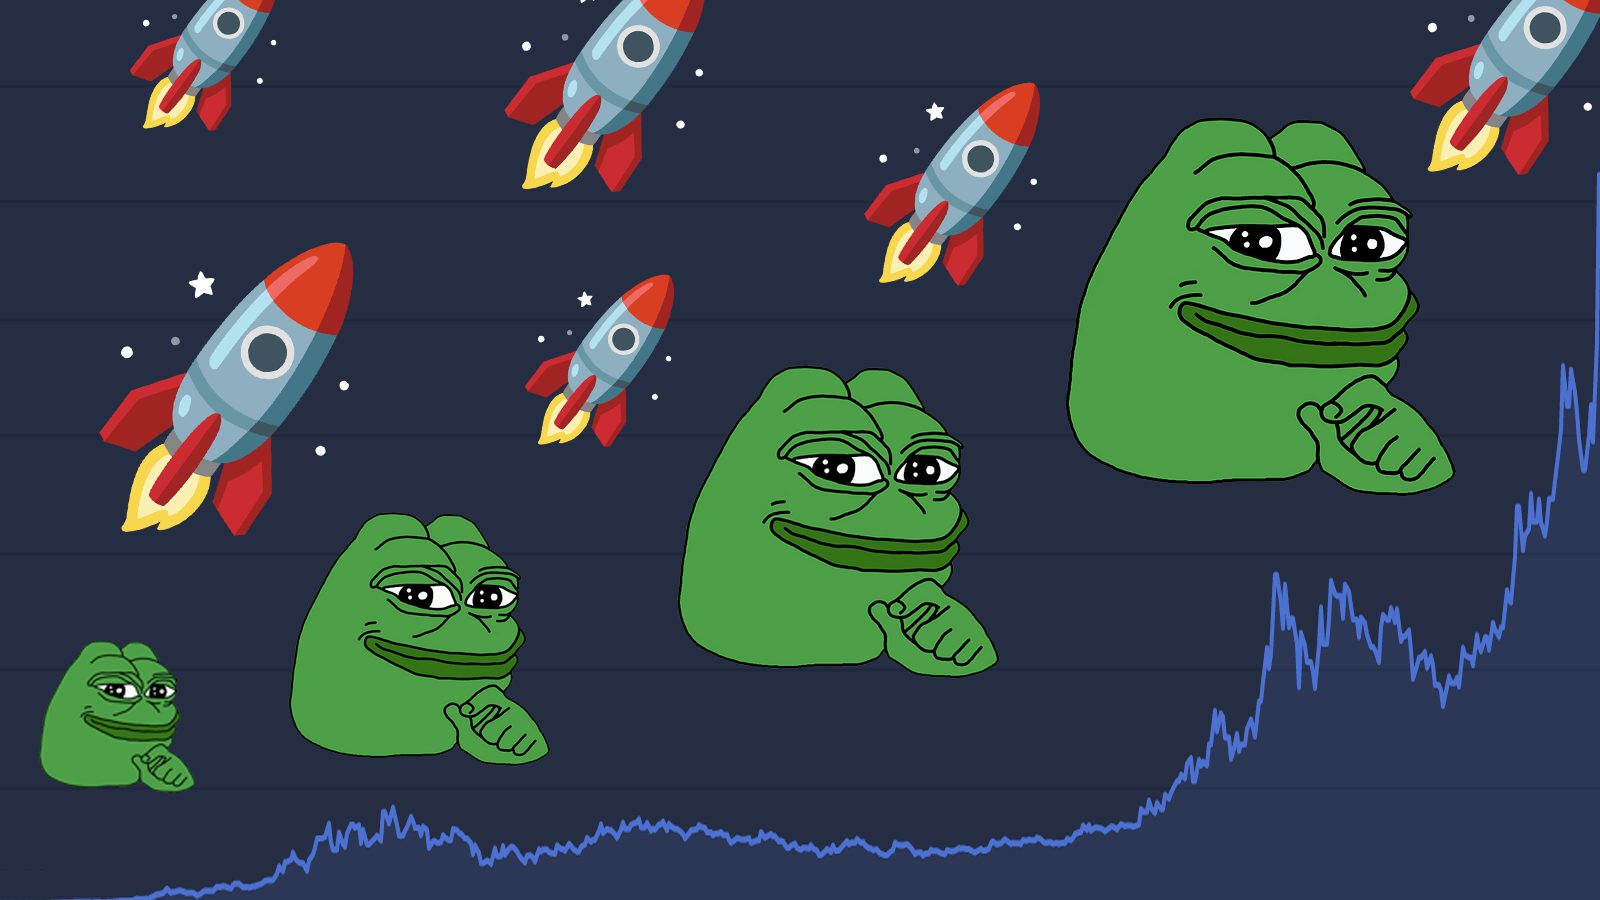 Pepe Price Prediction: How High Can It Surge This Week?